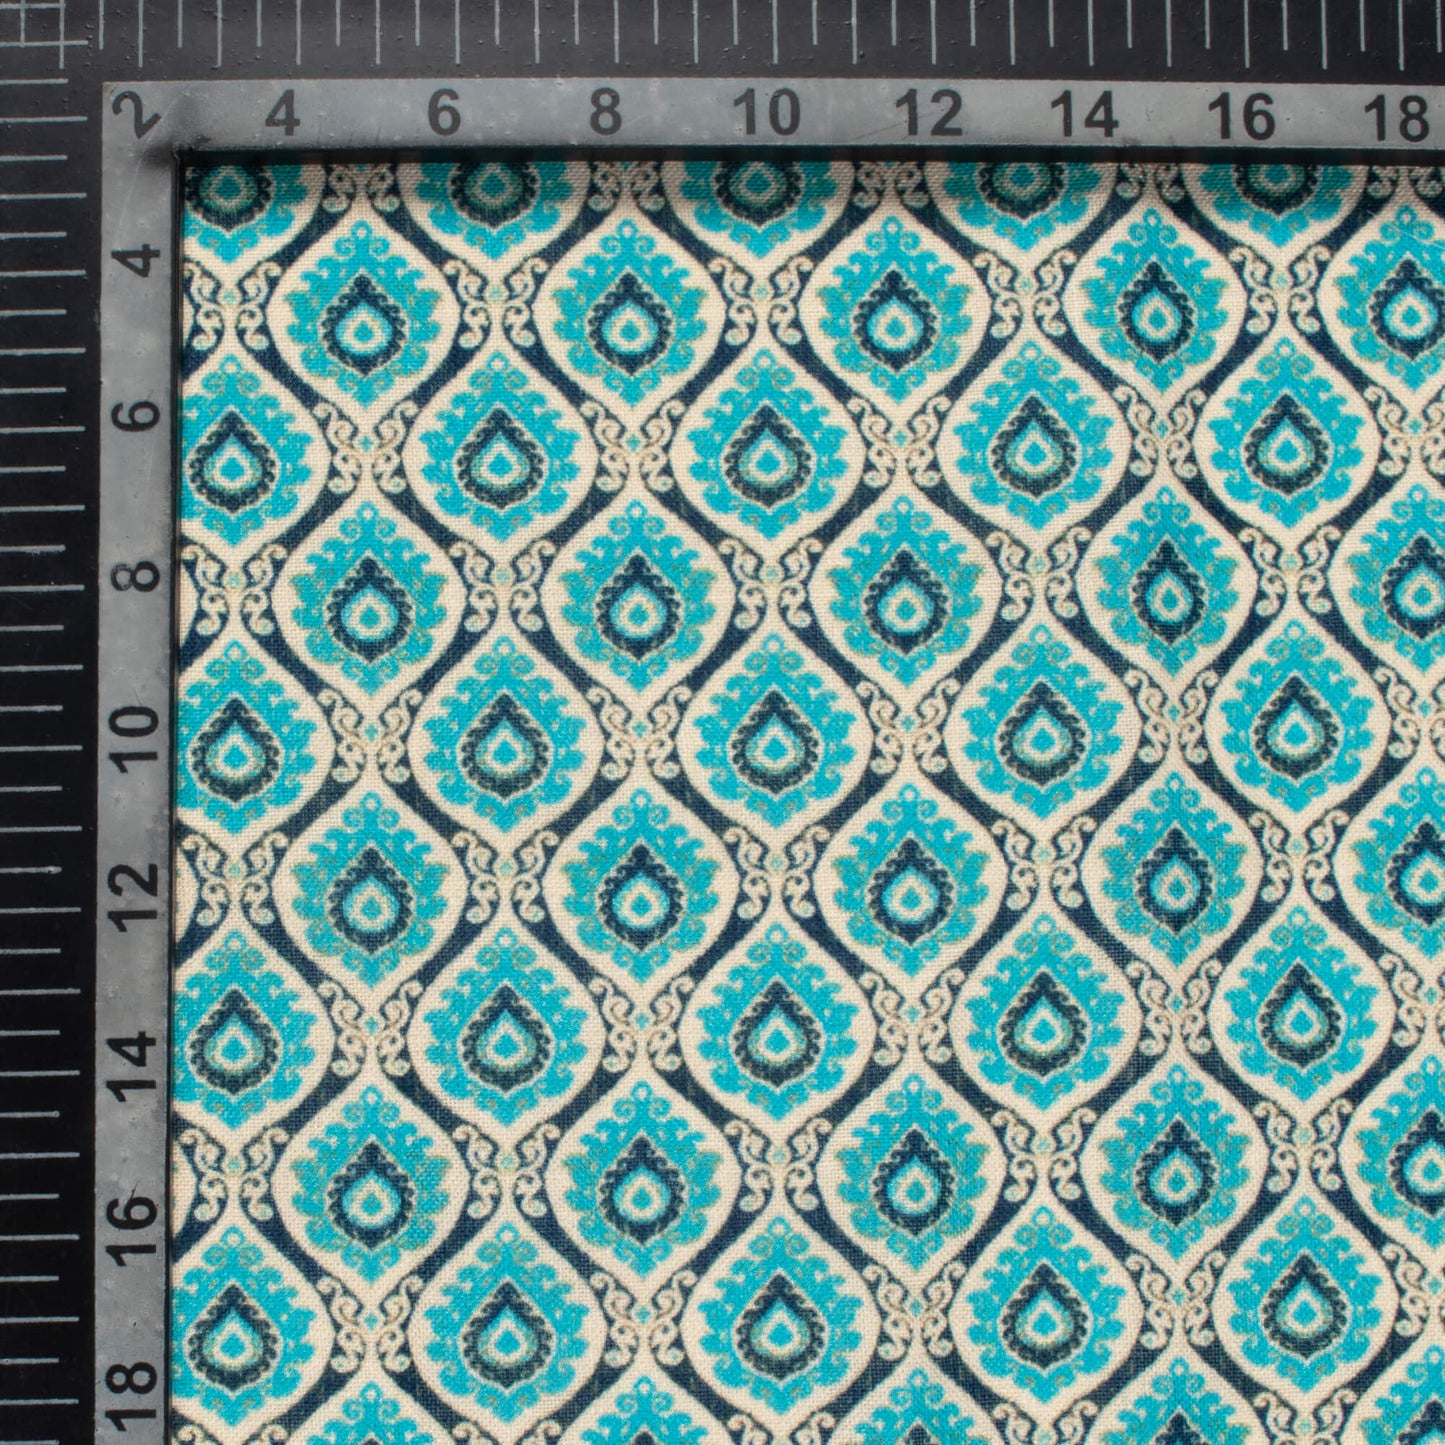 Off White And Sky Blue Trellis Pattern Digital Print Linen Textured Fabric (Width 56 Inches)